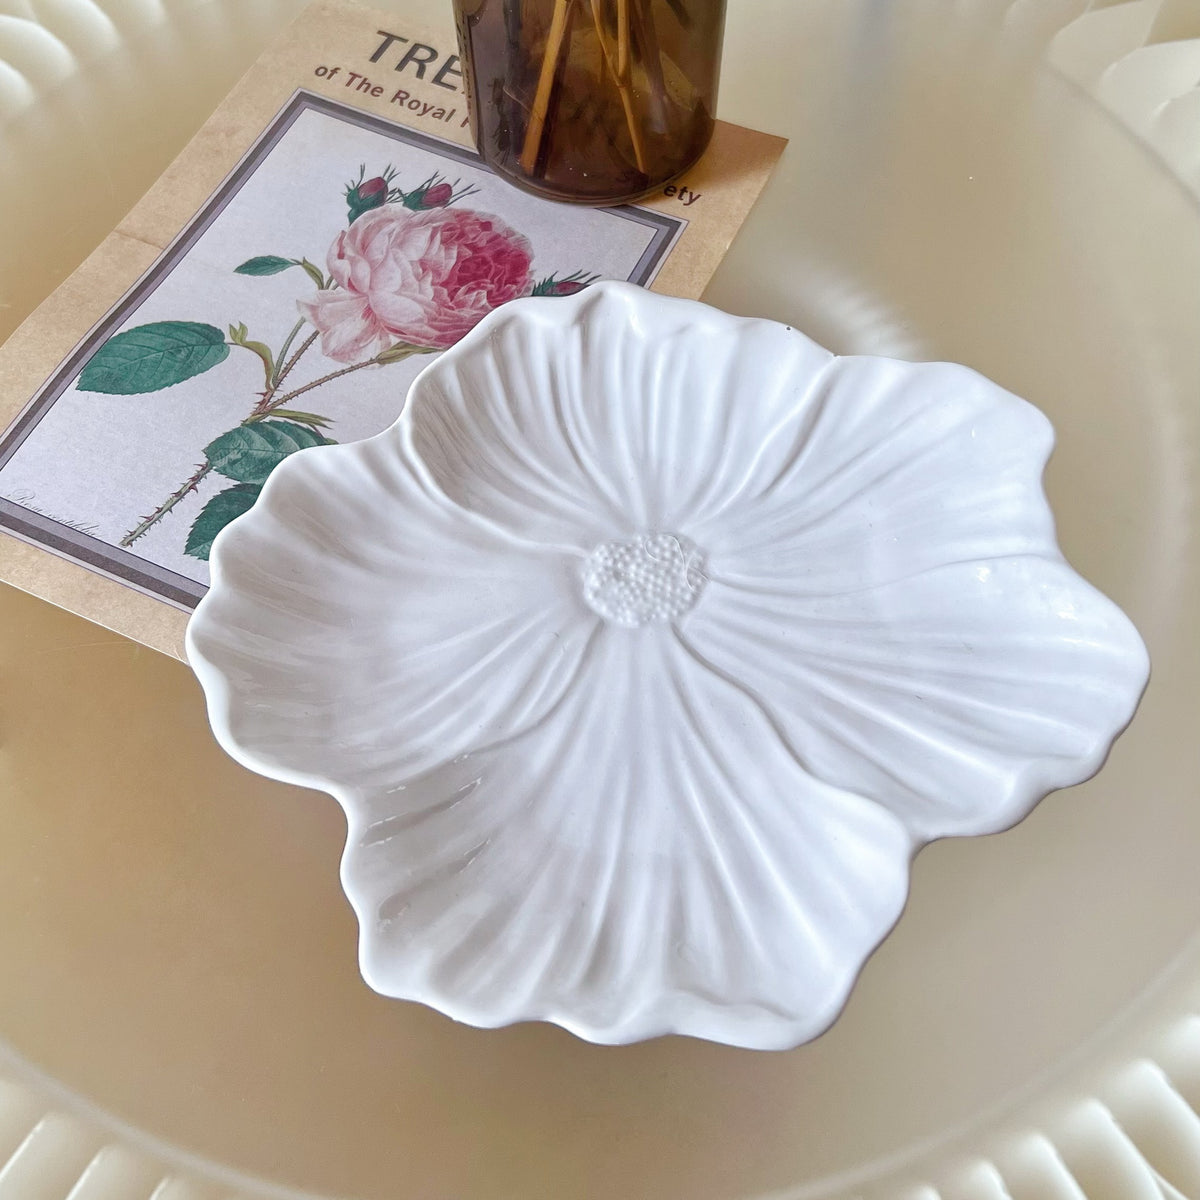 Handcrafted Hibiscus Flower Candle Tray - LMJ Candles